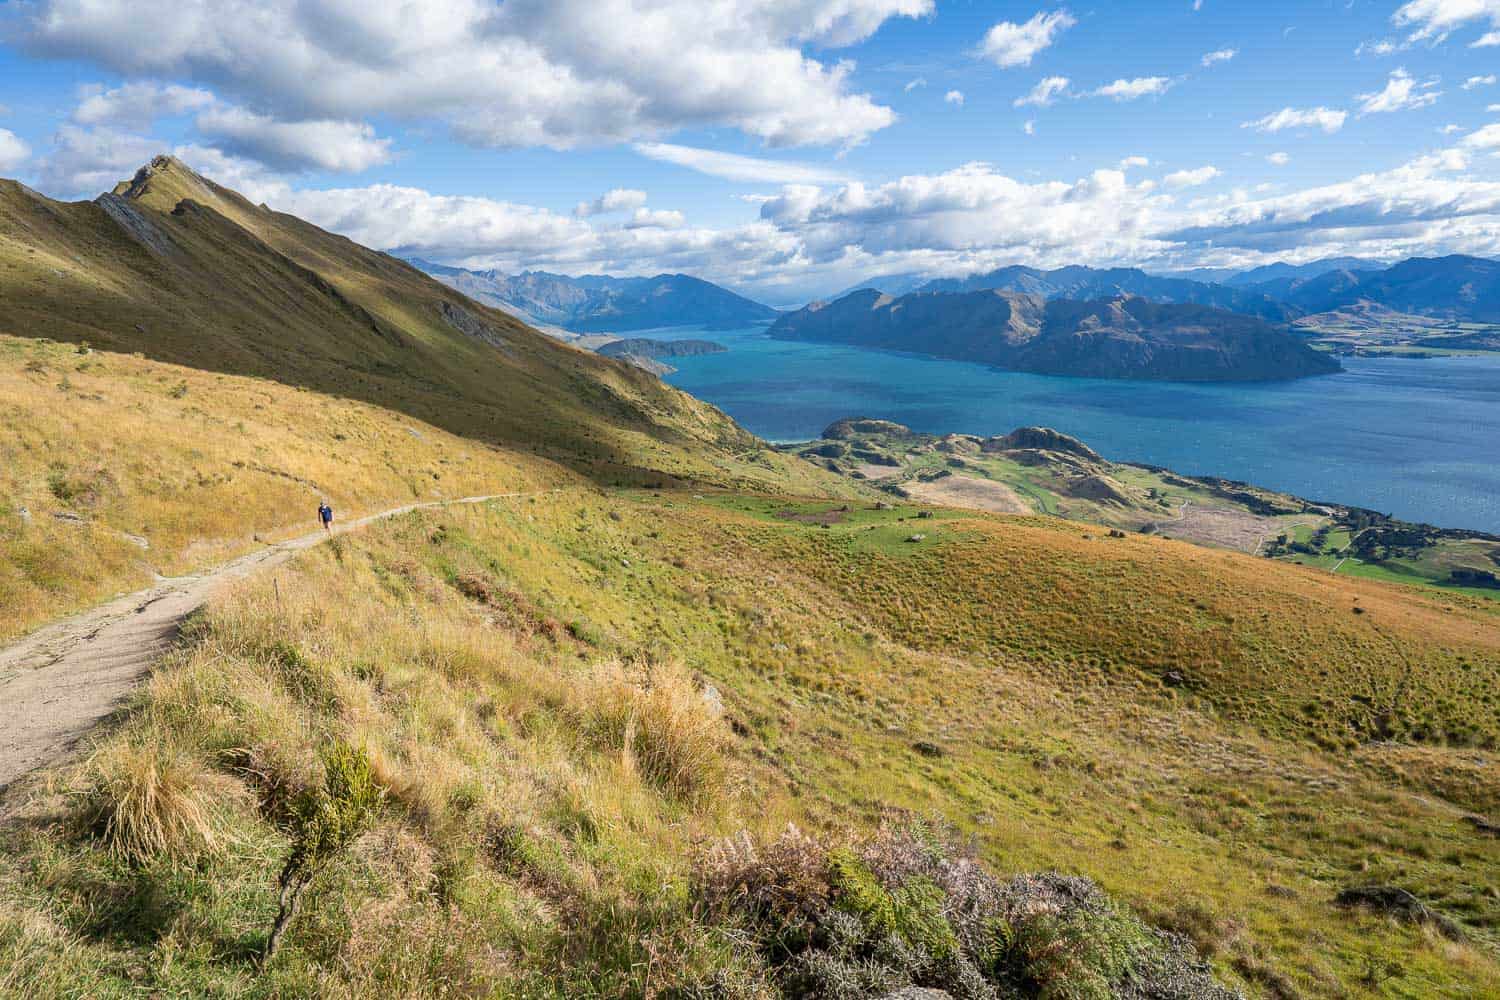 The view on the way up Roy's Peak Track with Lake Wanaka below, New Zealand